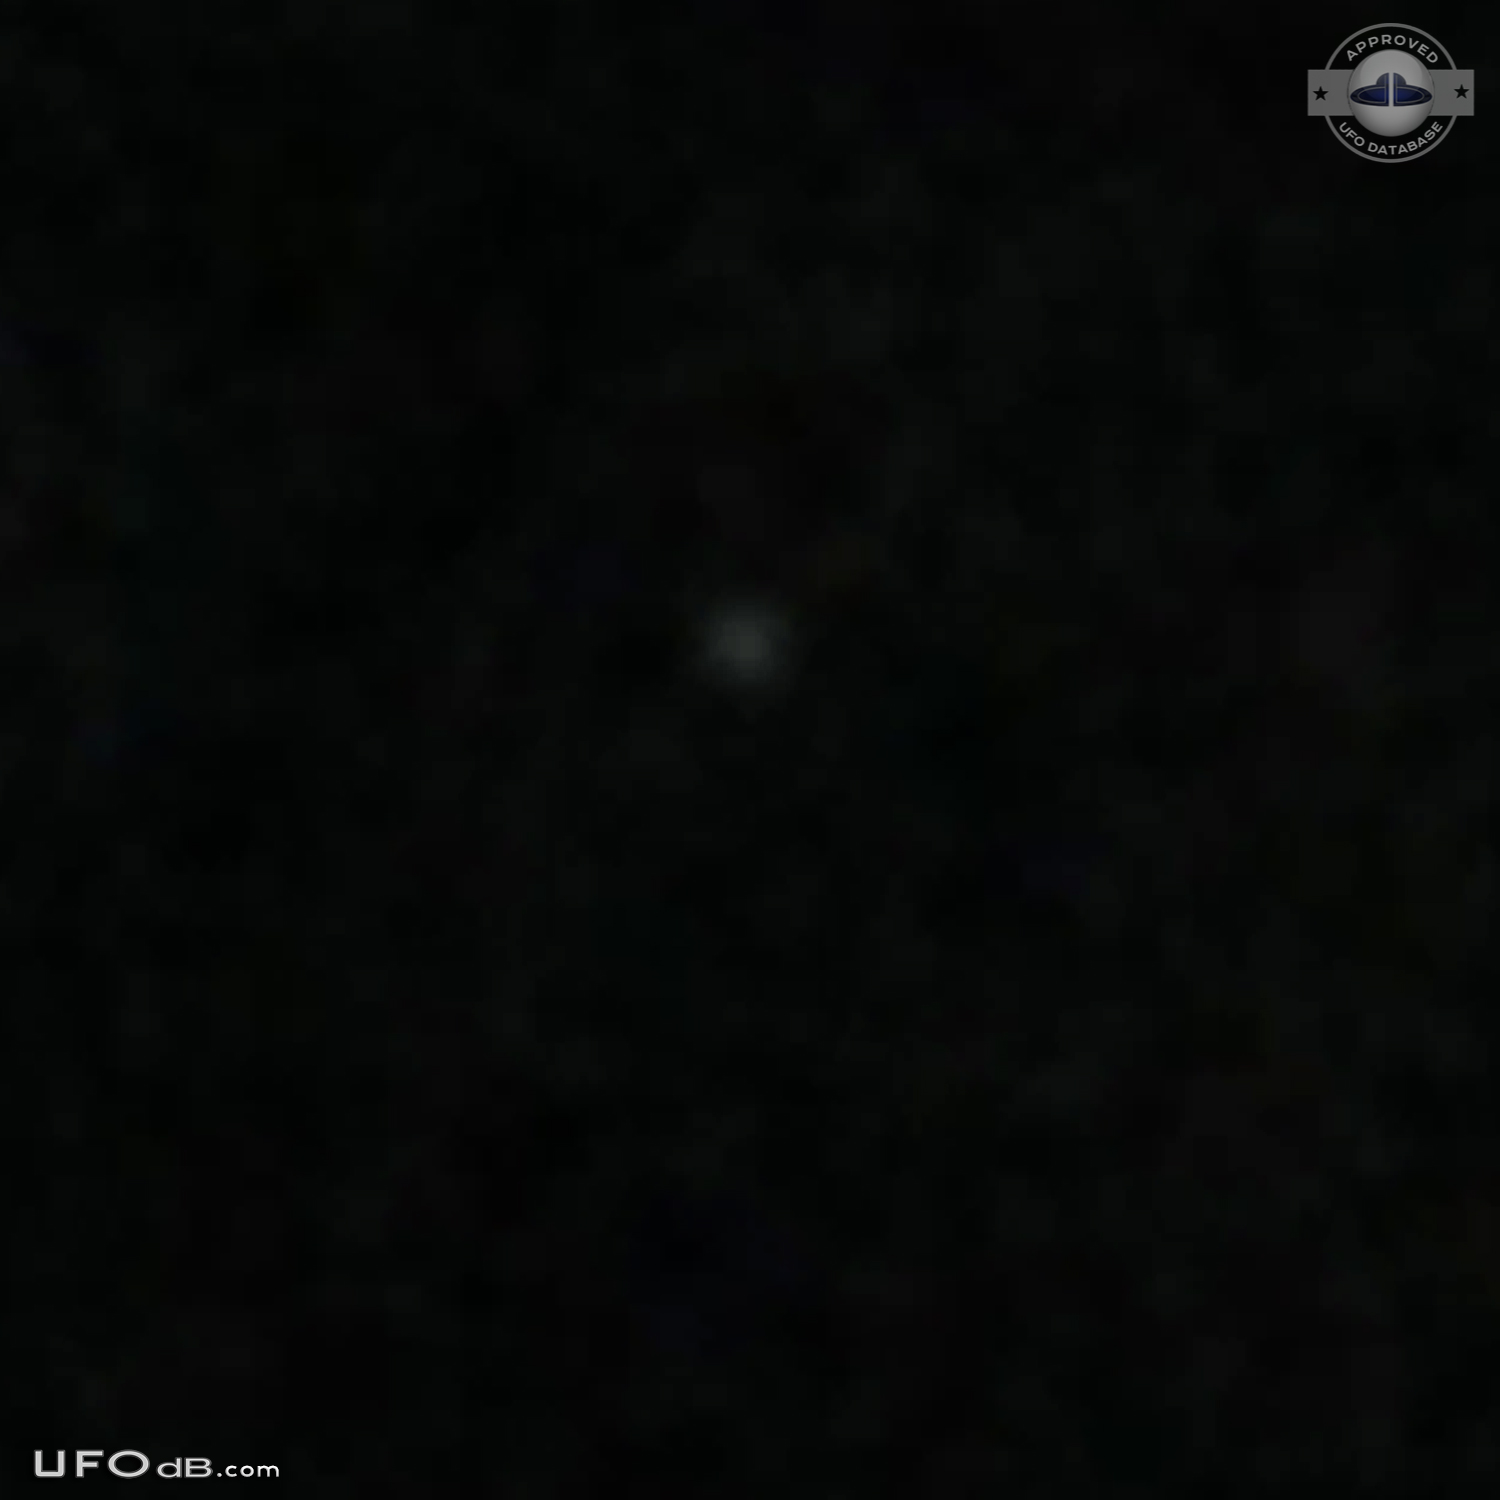 UFO over South sky in Gampaha Sri Lanka Changing Red,Blue,White lights UFO Picture #606-5